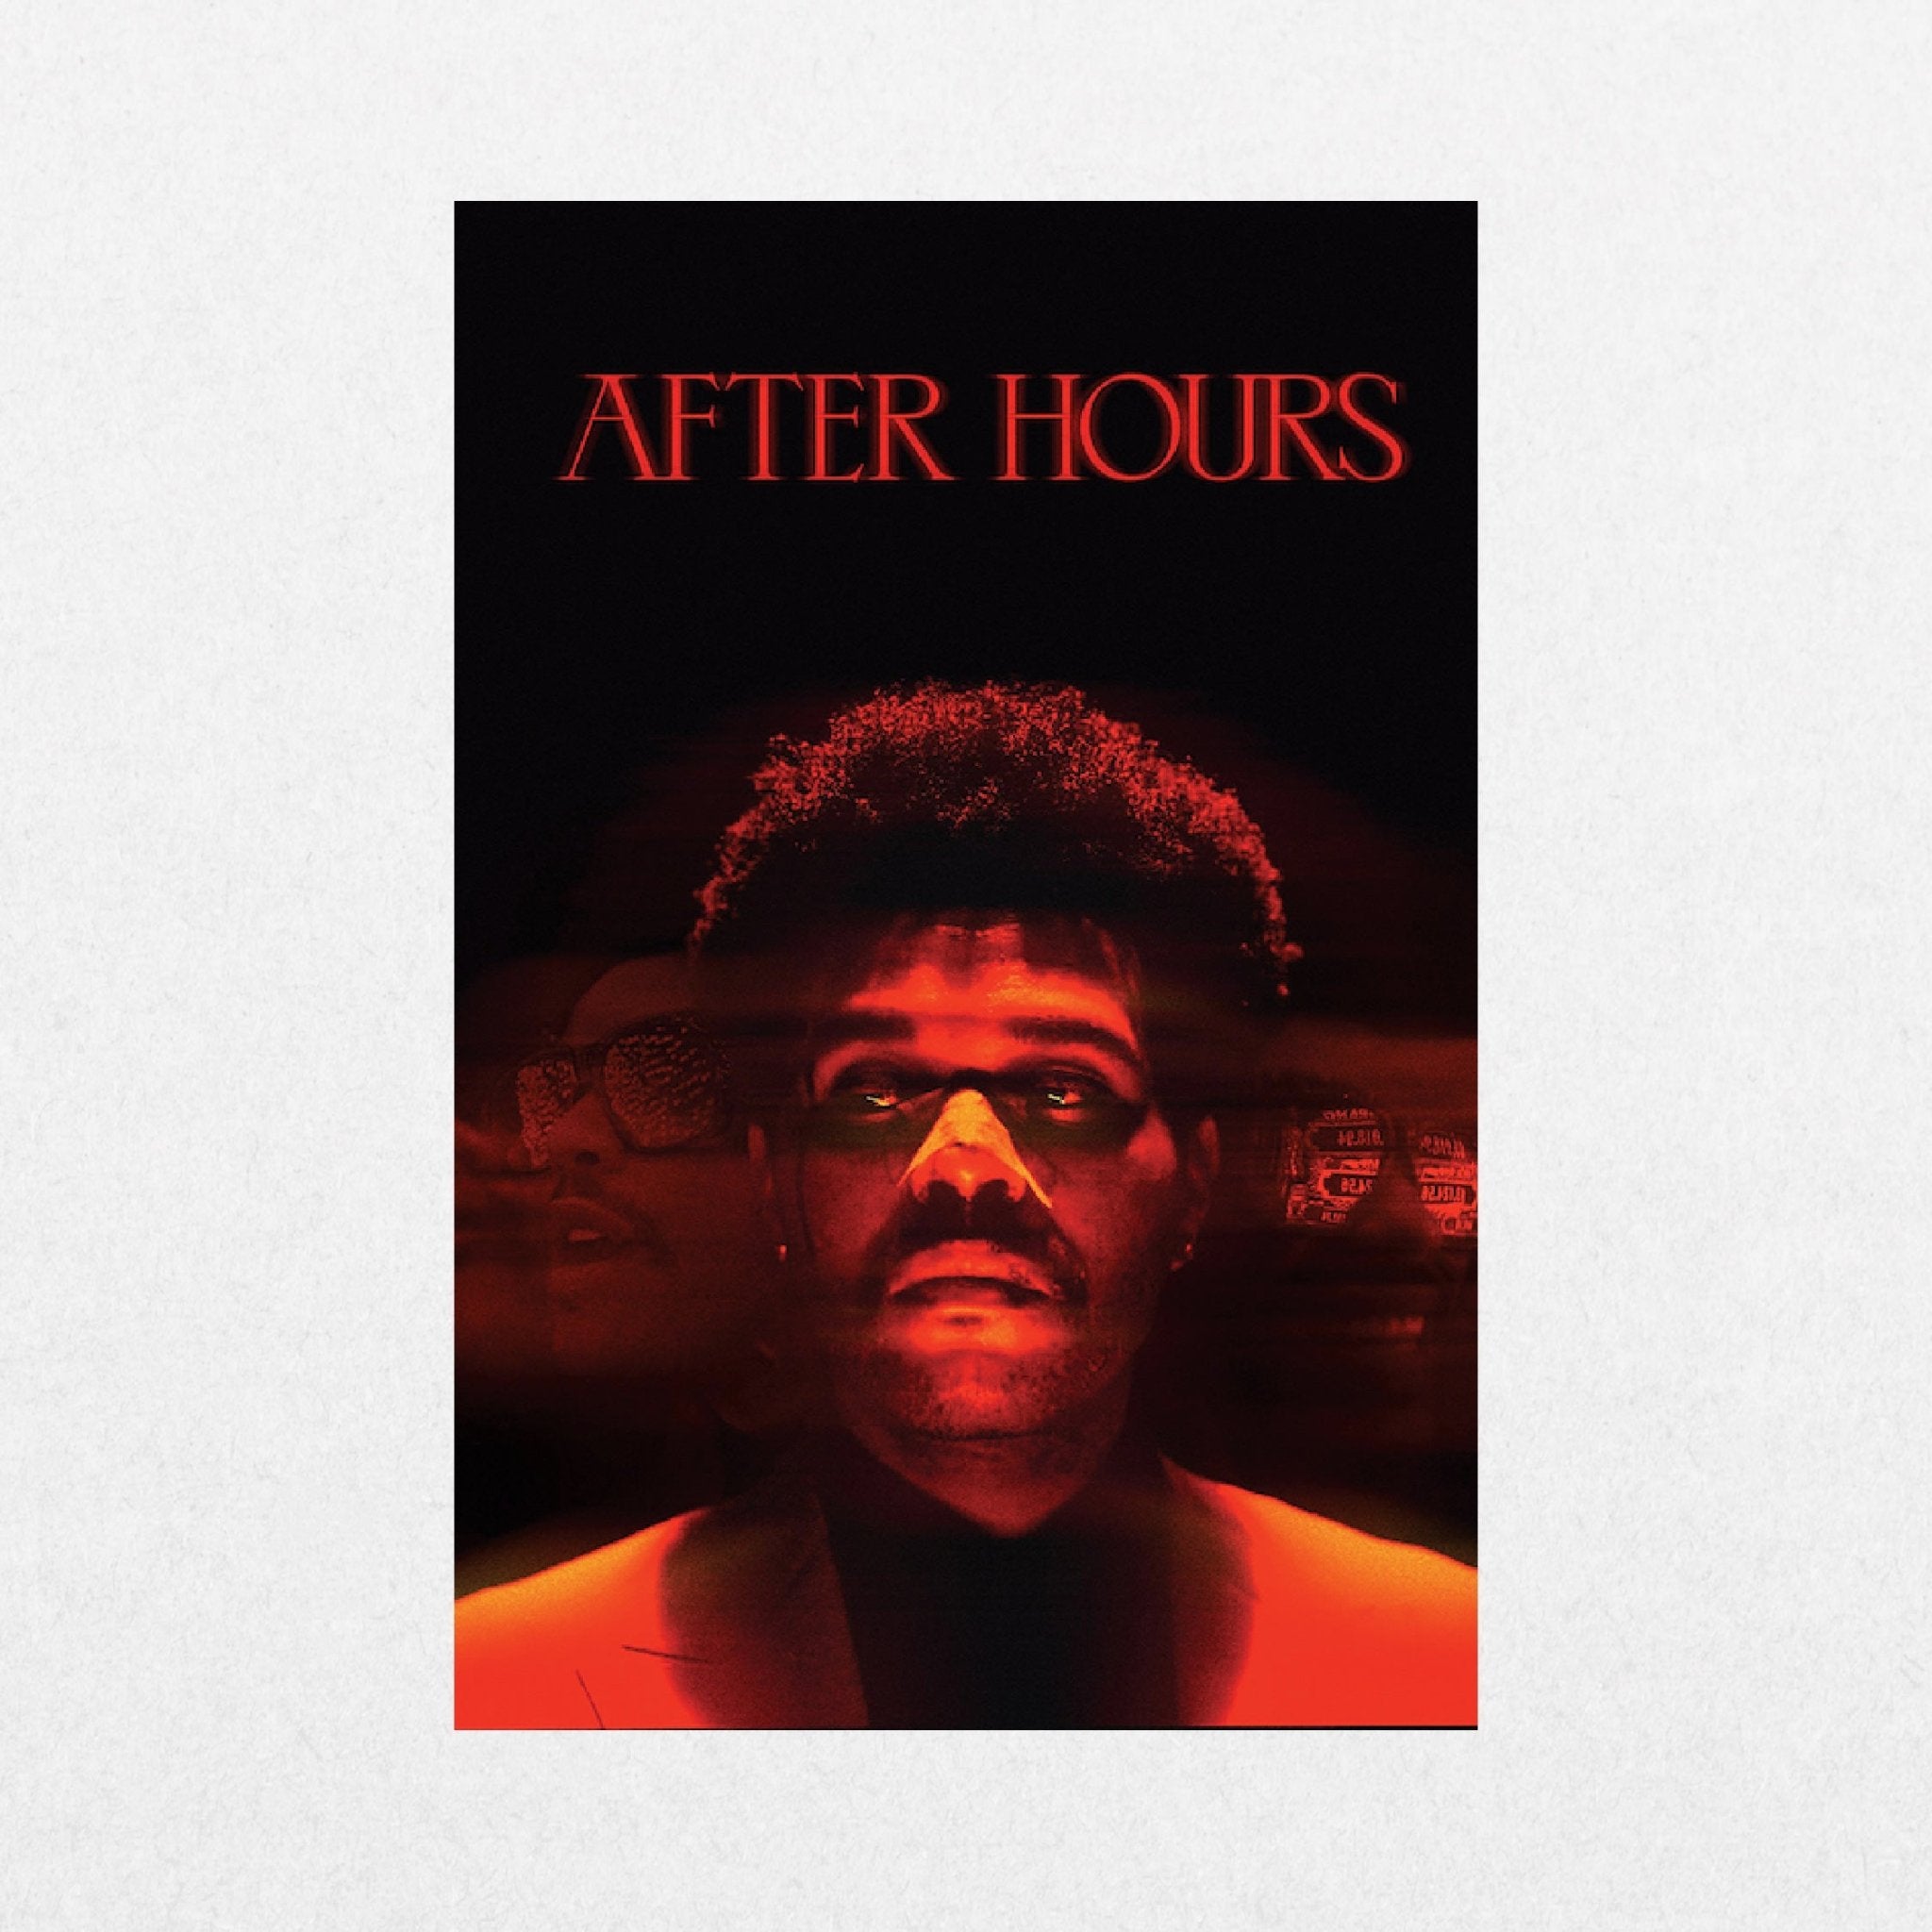 The Weeknd - After Hours, 2020 - El Cartel